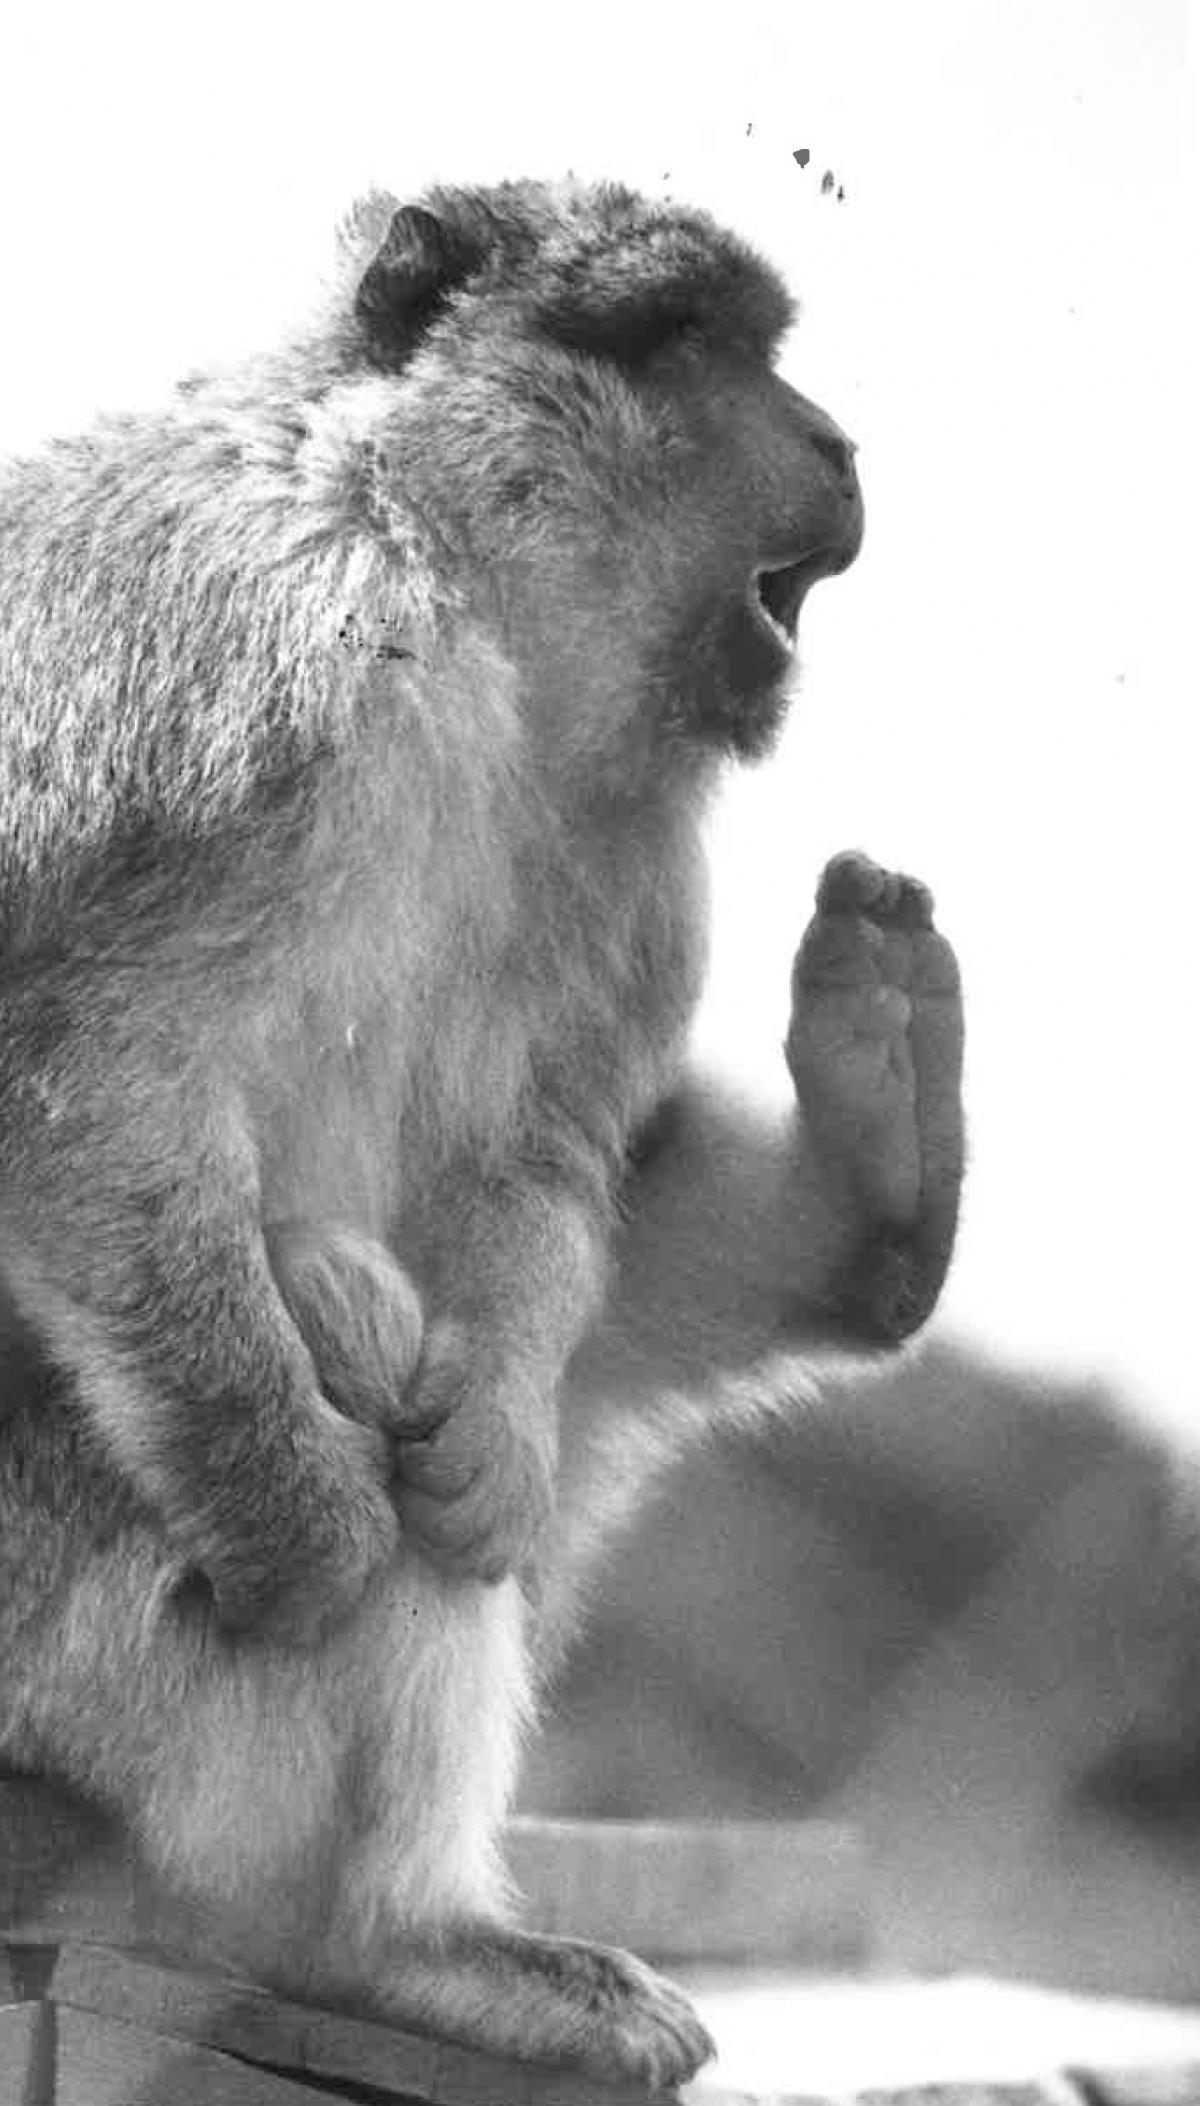 Pictures of Monkey World, its residents and famous visitors through the years from the Daily Echo archives.